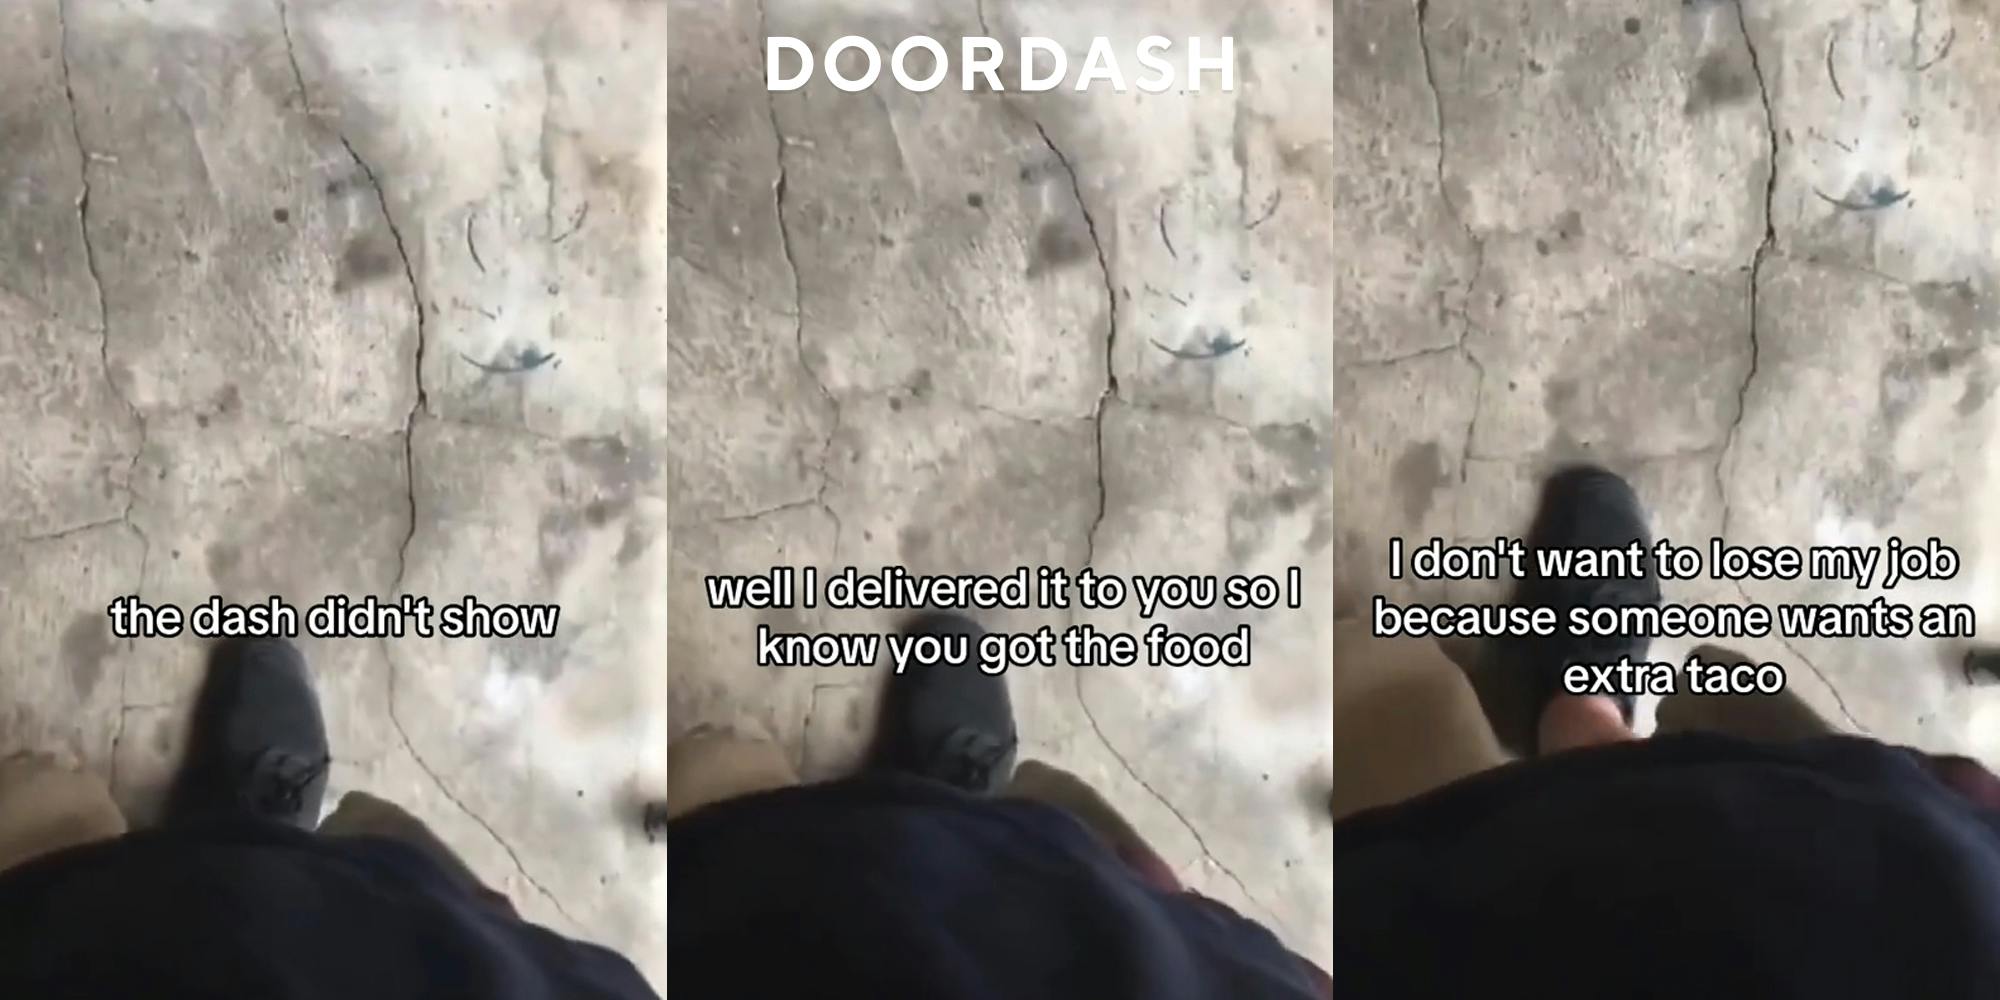 DoorDash Driver Lied About Getting A Flat Tire So He Could Eat A